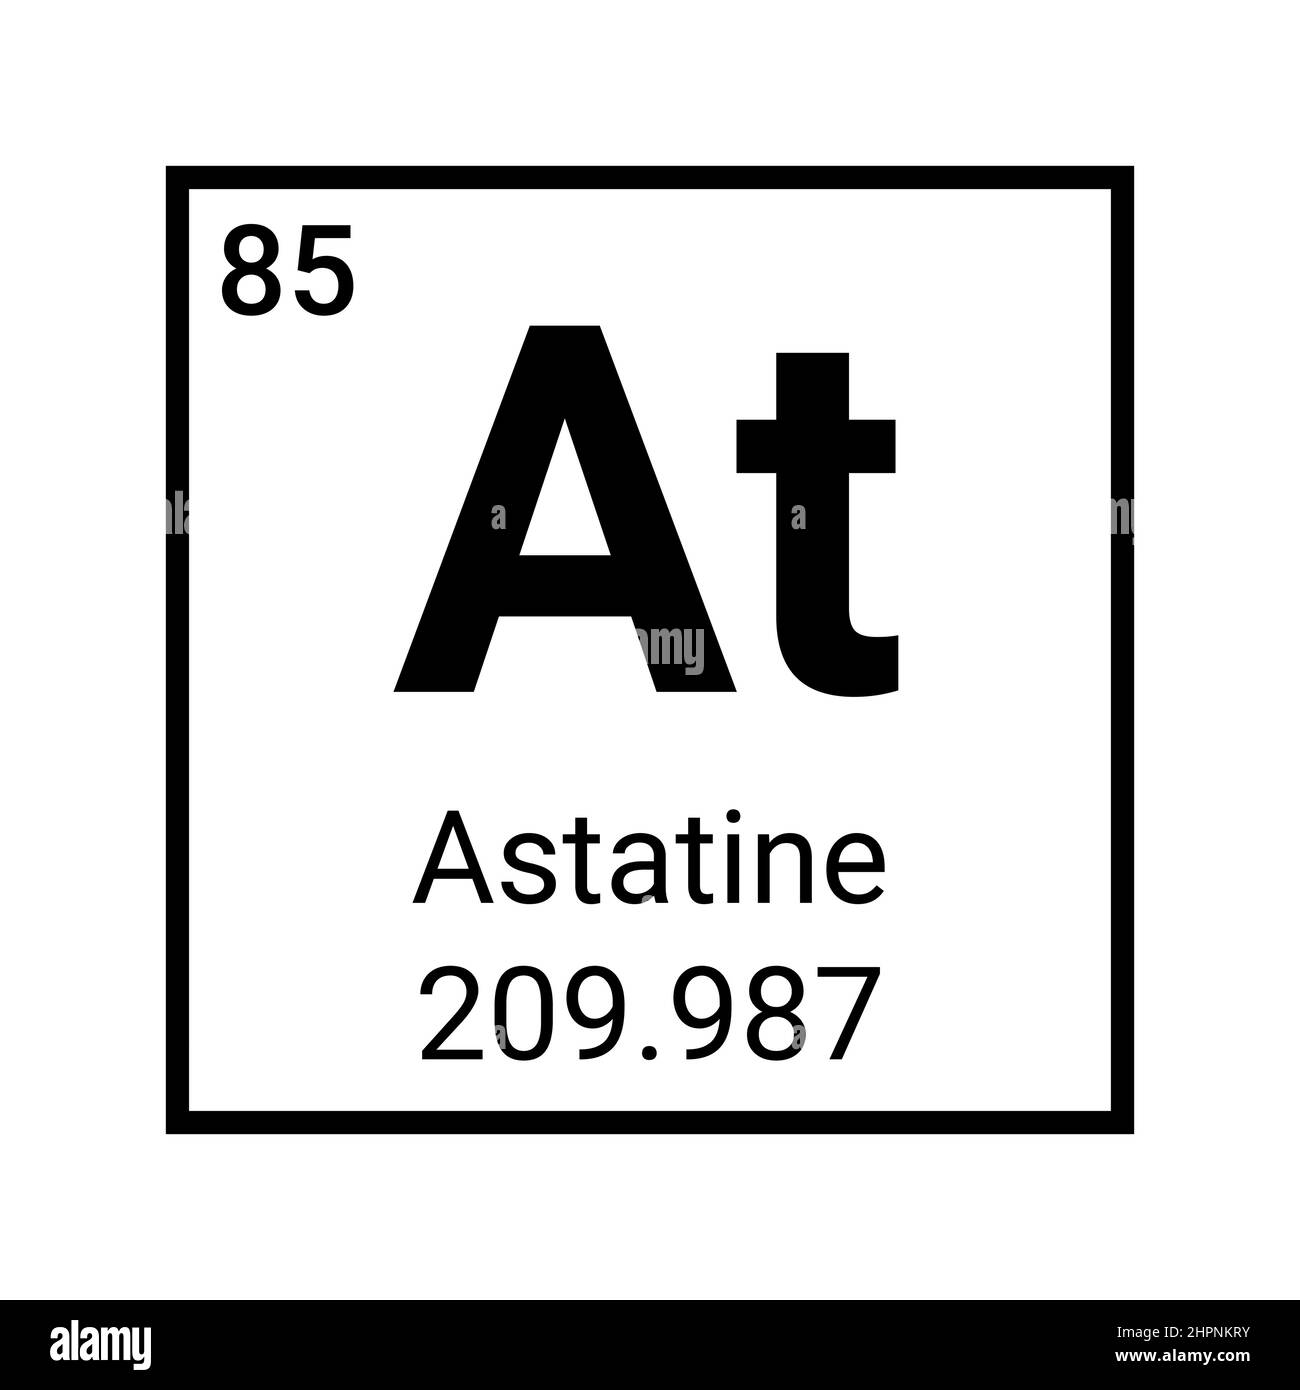 Astatine periodic table element icon. Chemical mendeleev table astatine icon Stock Vector